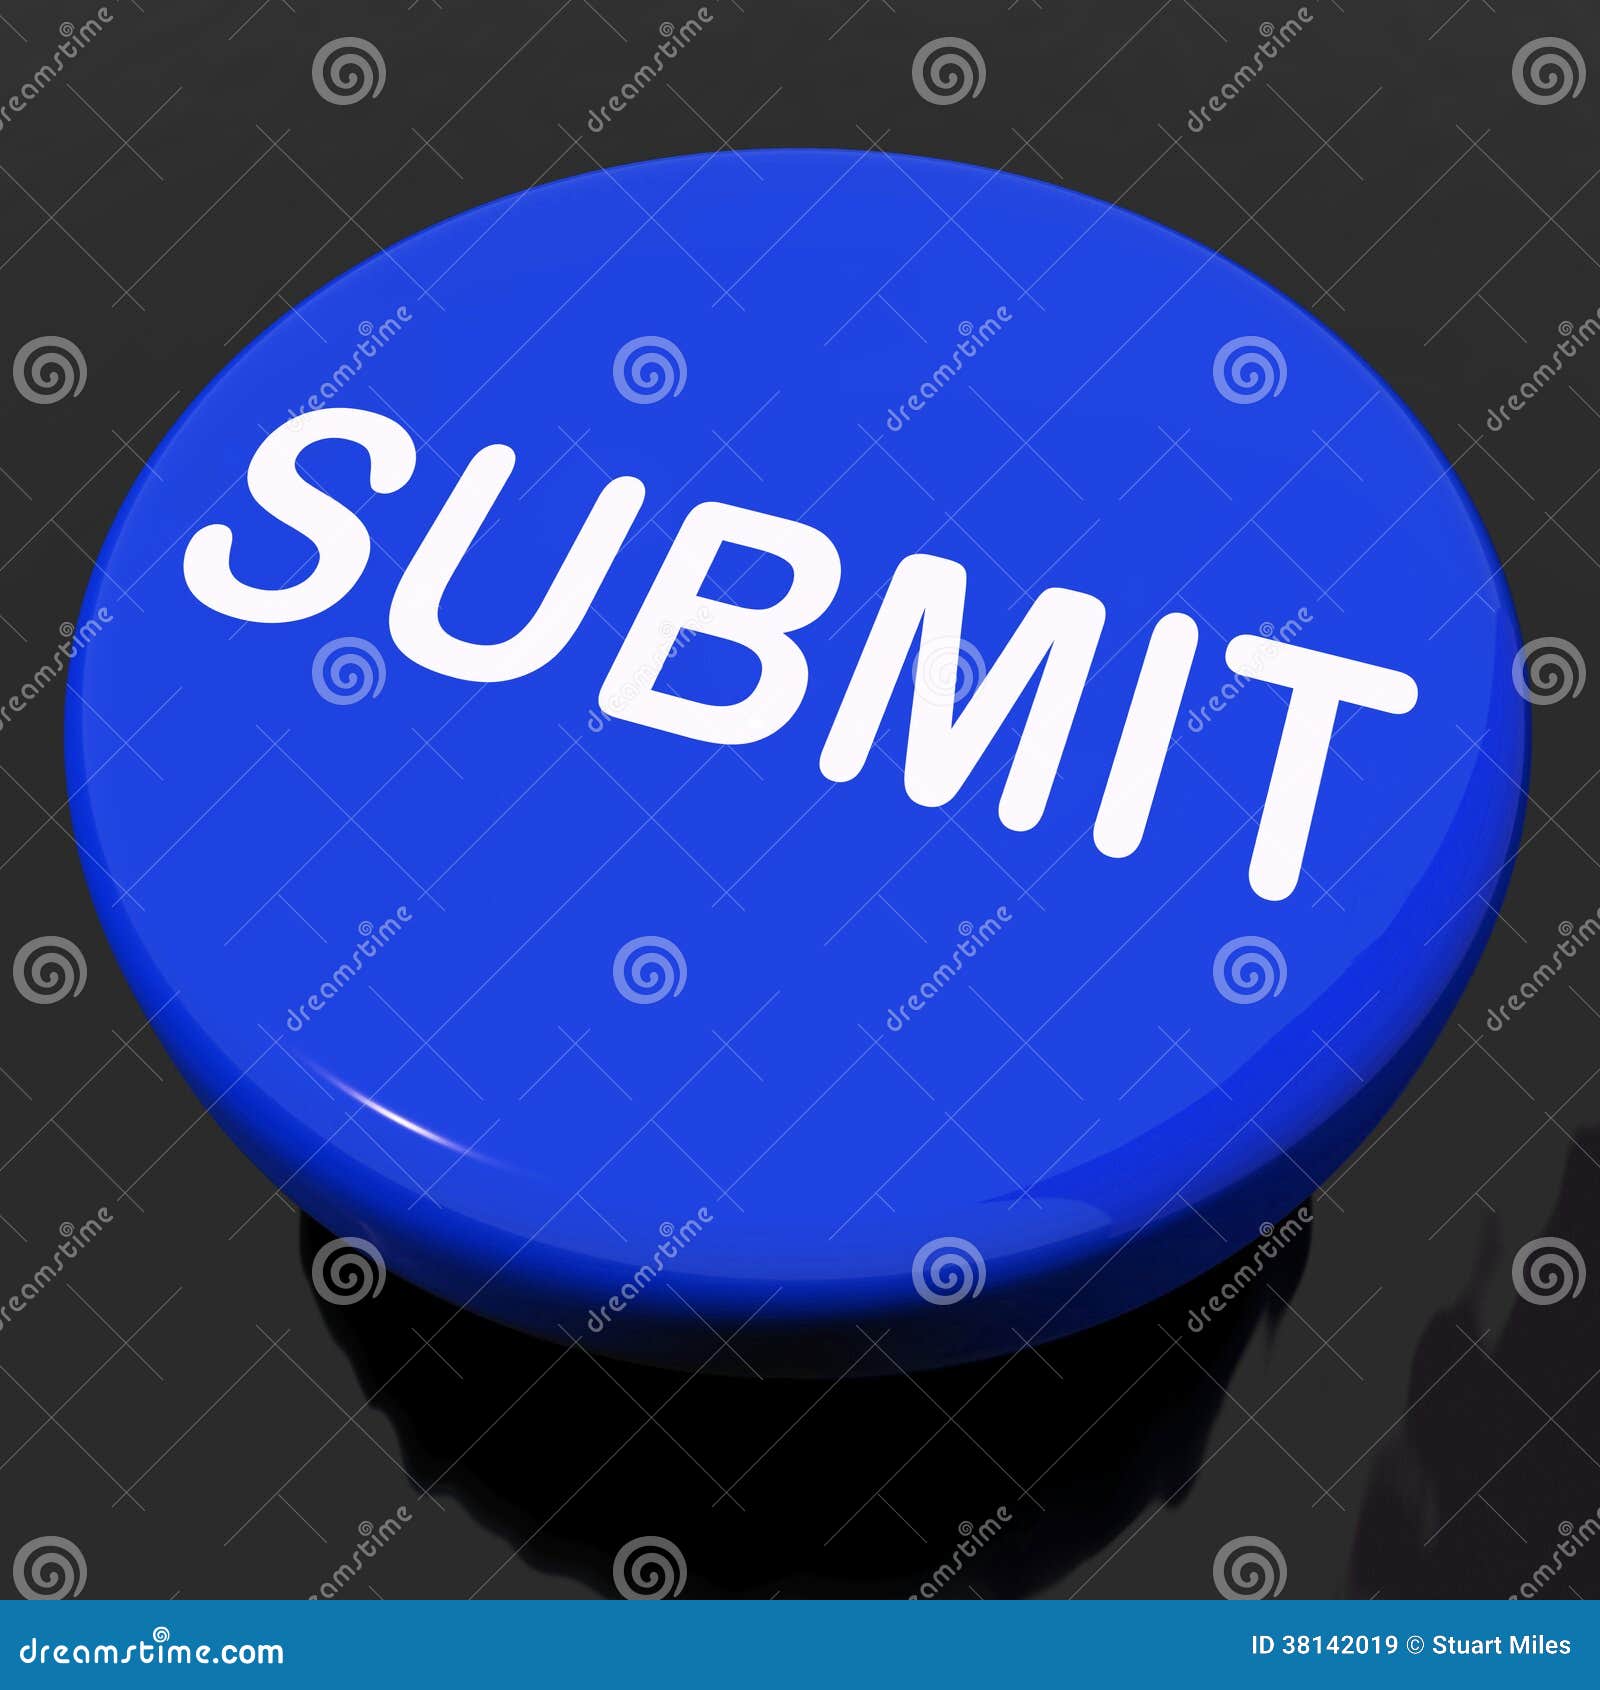 submit button shows submitting submission or application